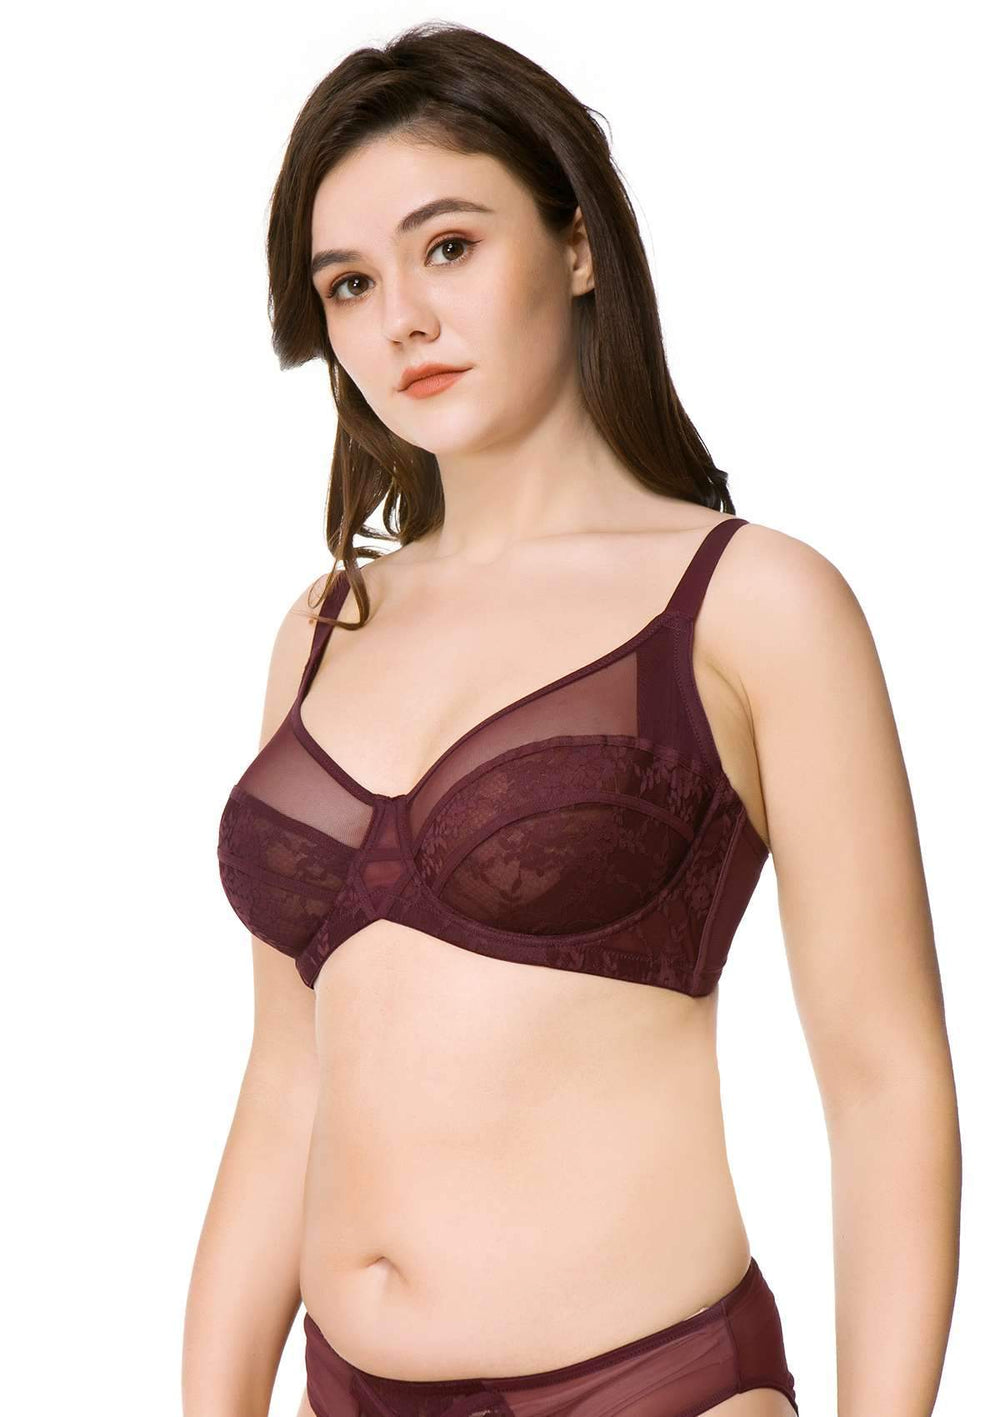 HSIA Gladioli Lace-trimed Unlined Underwire Bra and panty Set